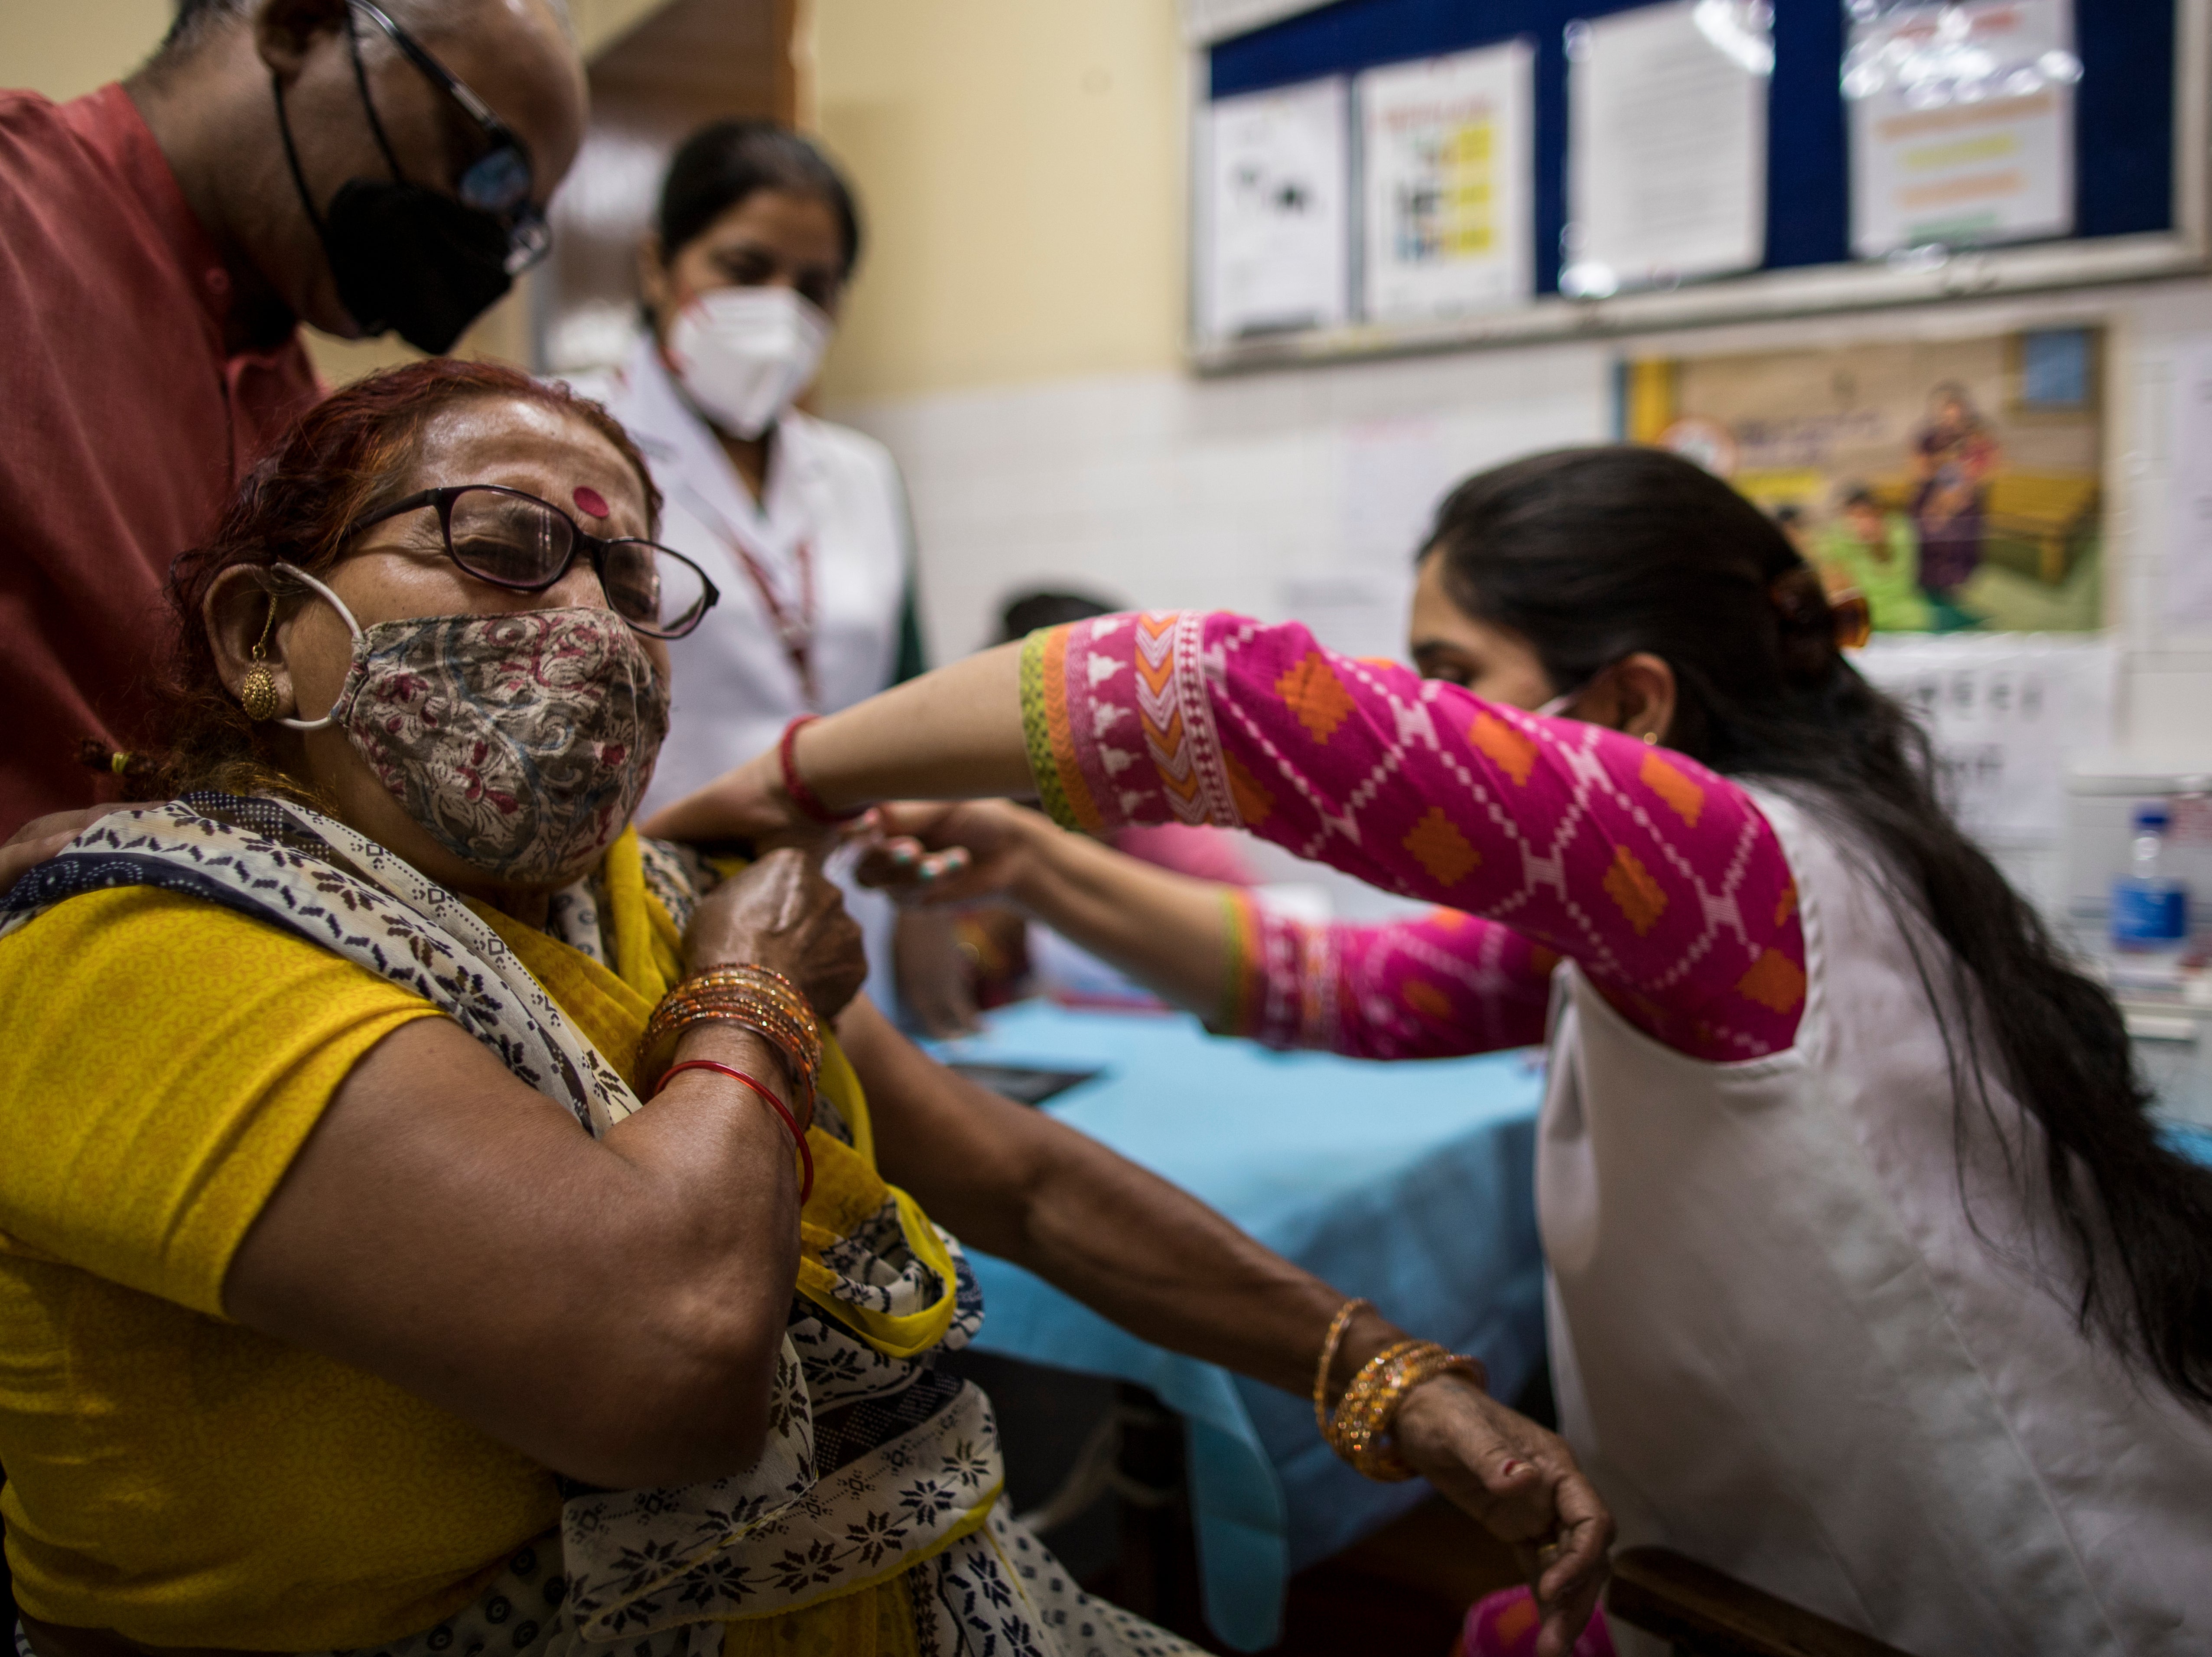 Experts have warned that India needs to ramp up its vaccination efforts